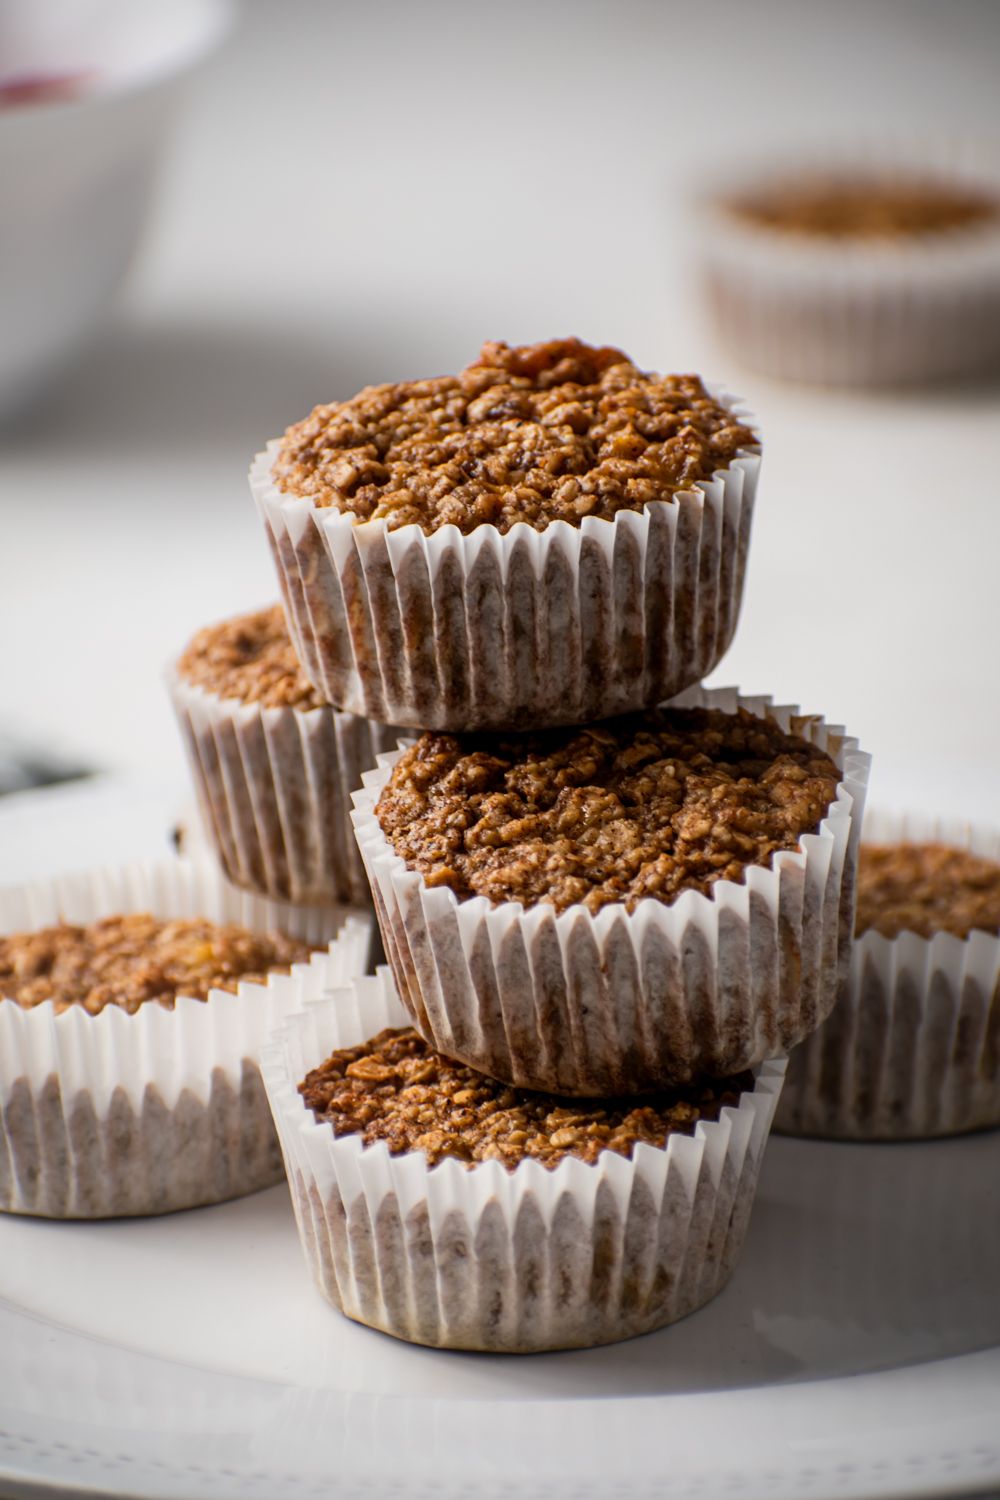 Baked oat muffins with white liners stacked on a plate with rolled oats, bananas, and almond milk.